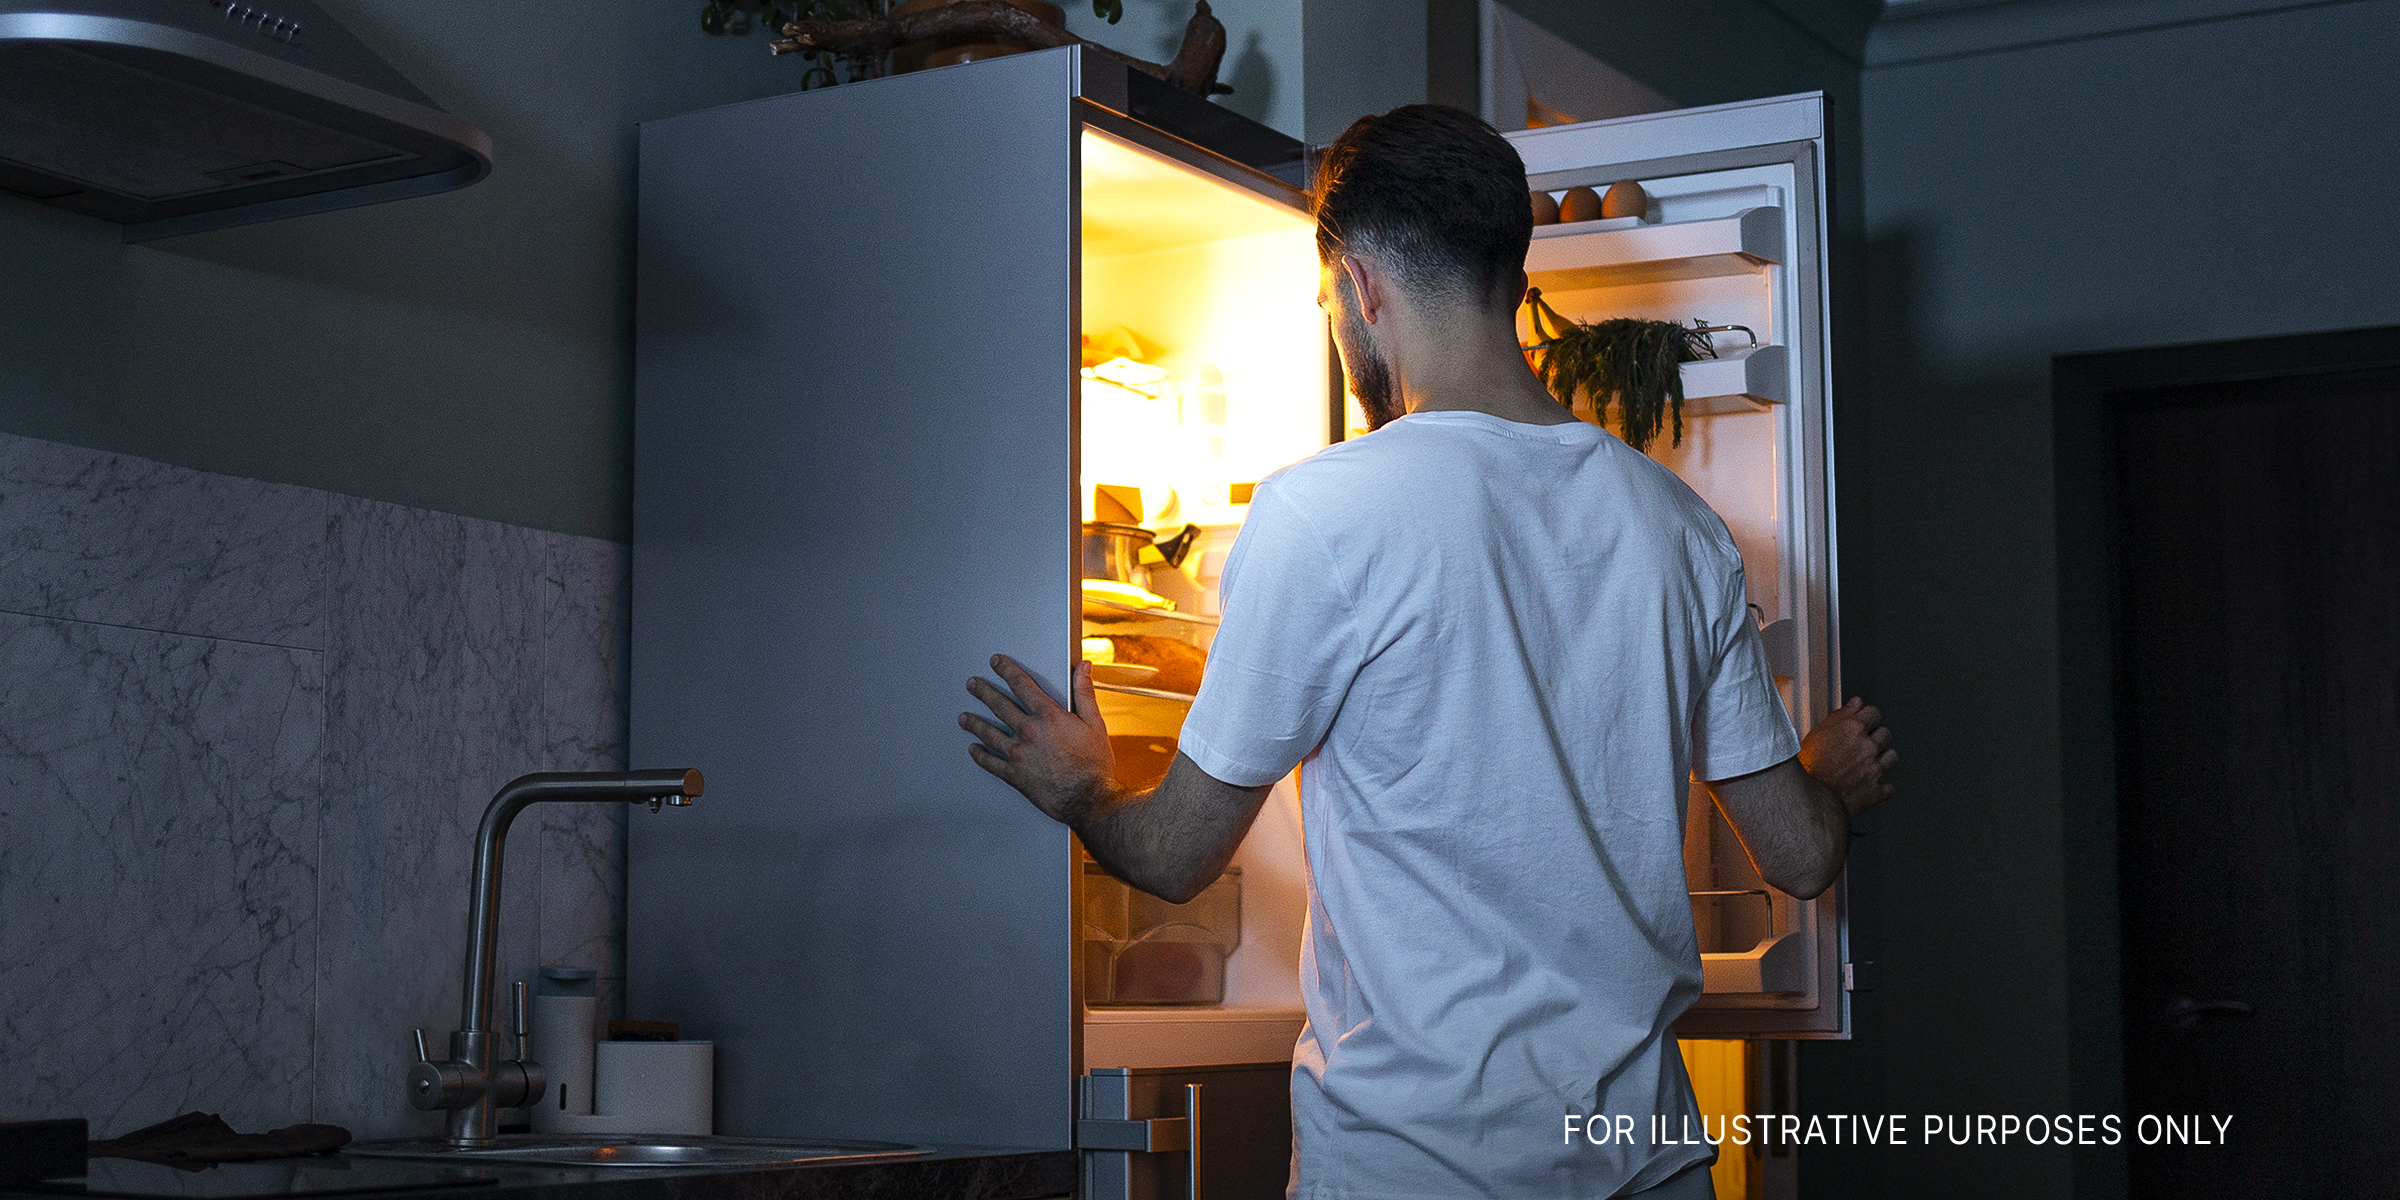 A man looking for snacks in the fridge | Source: Freepik